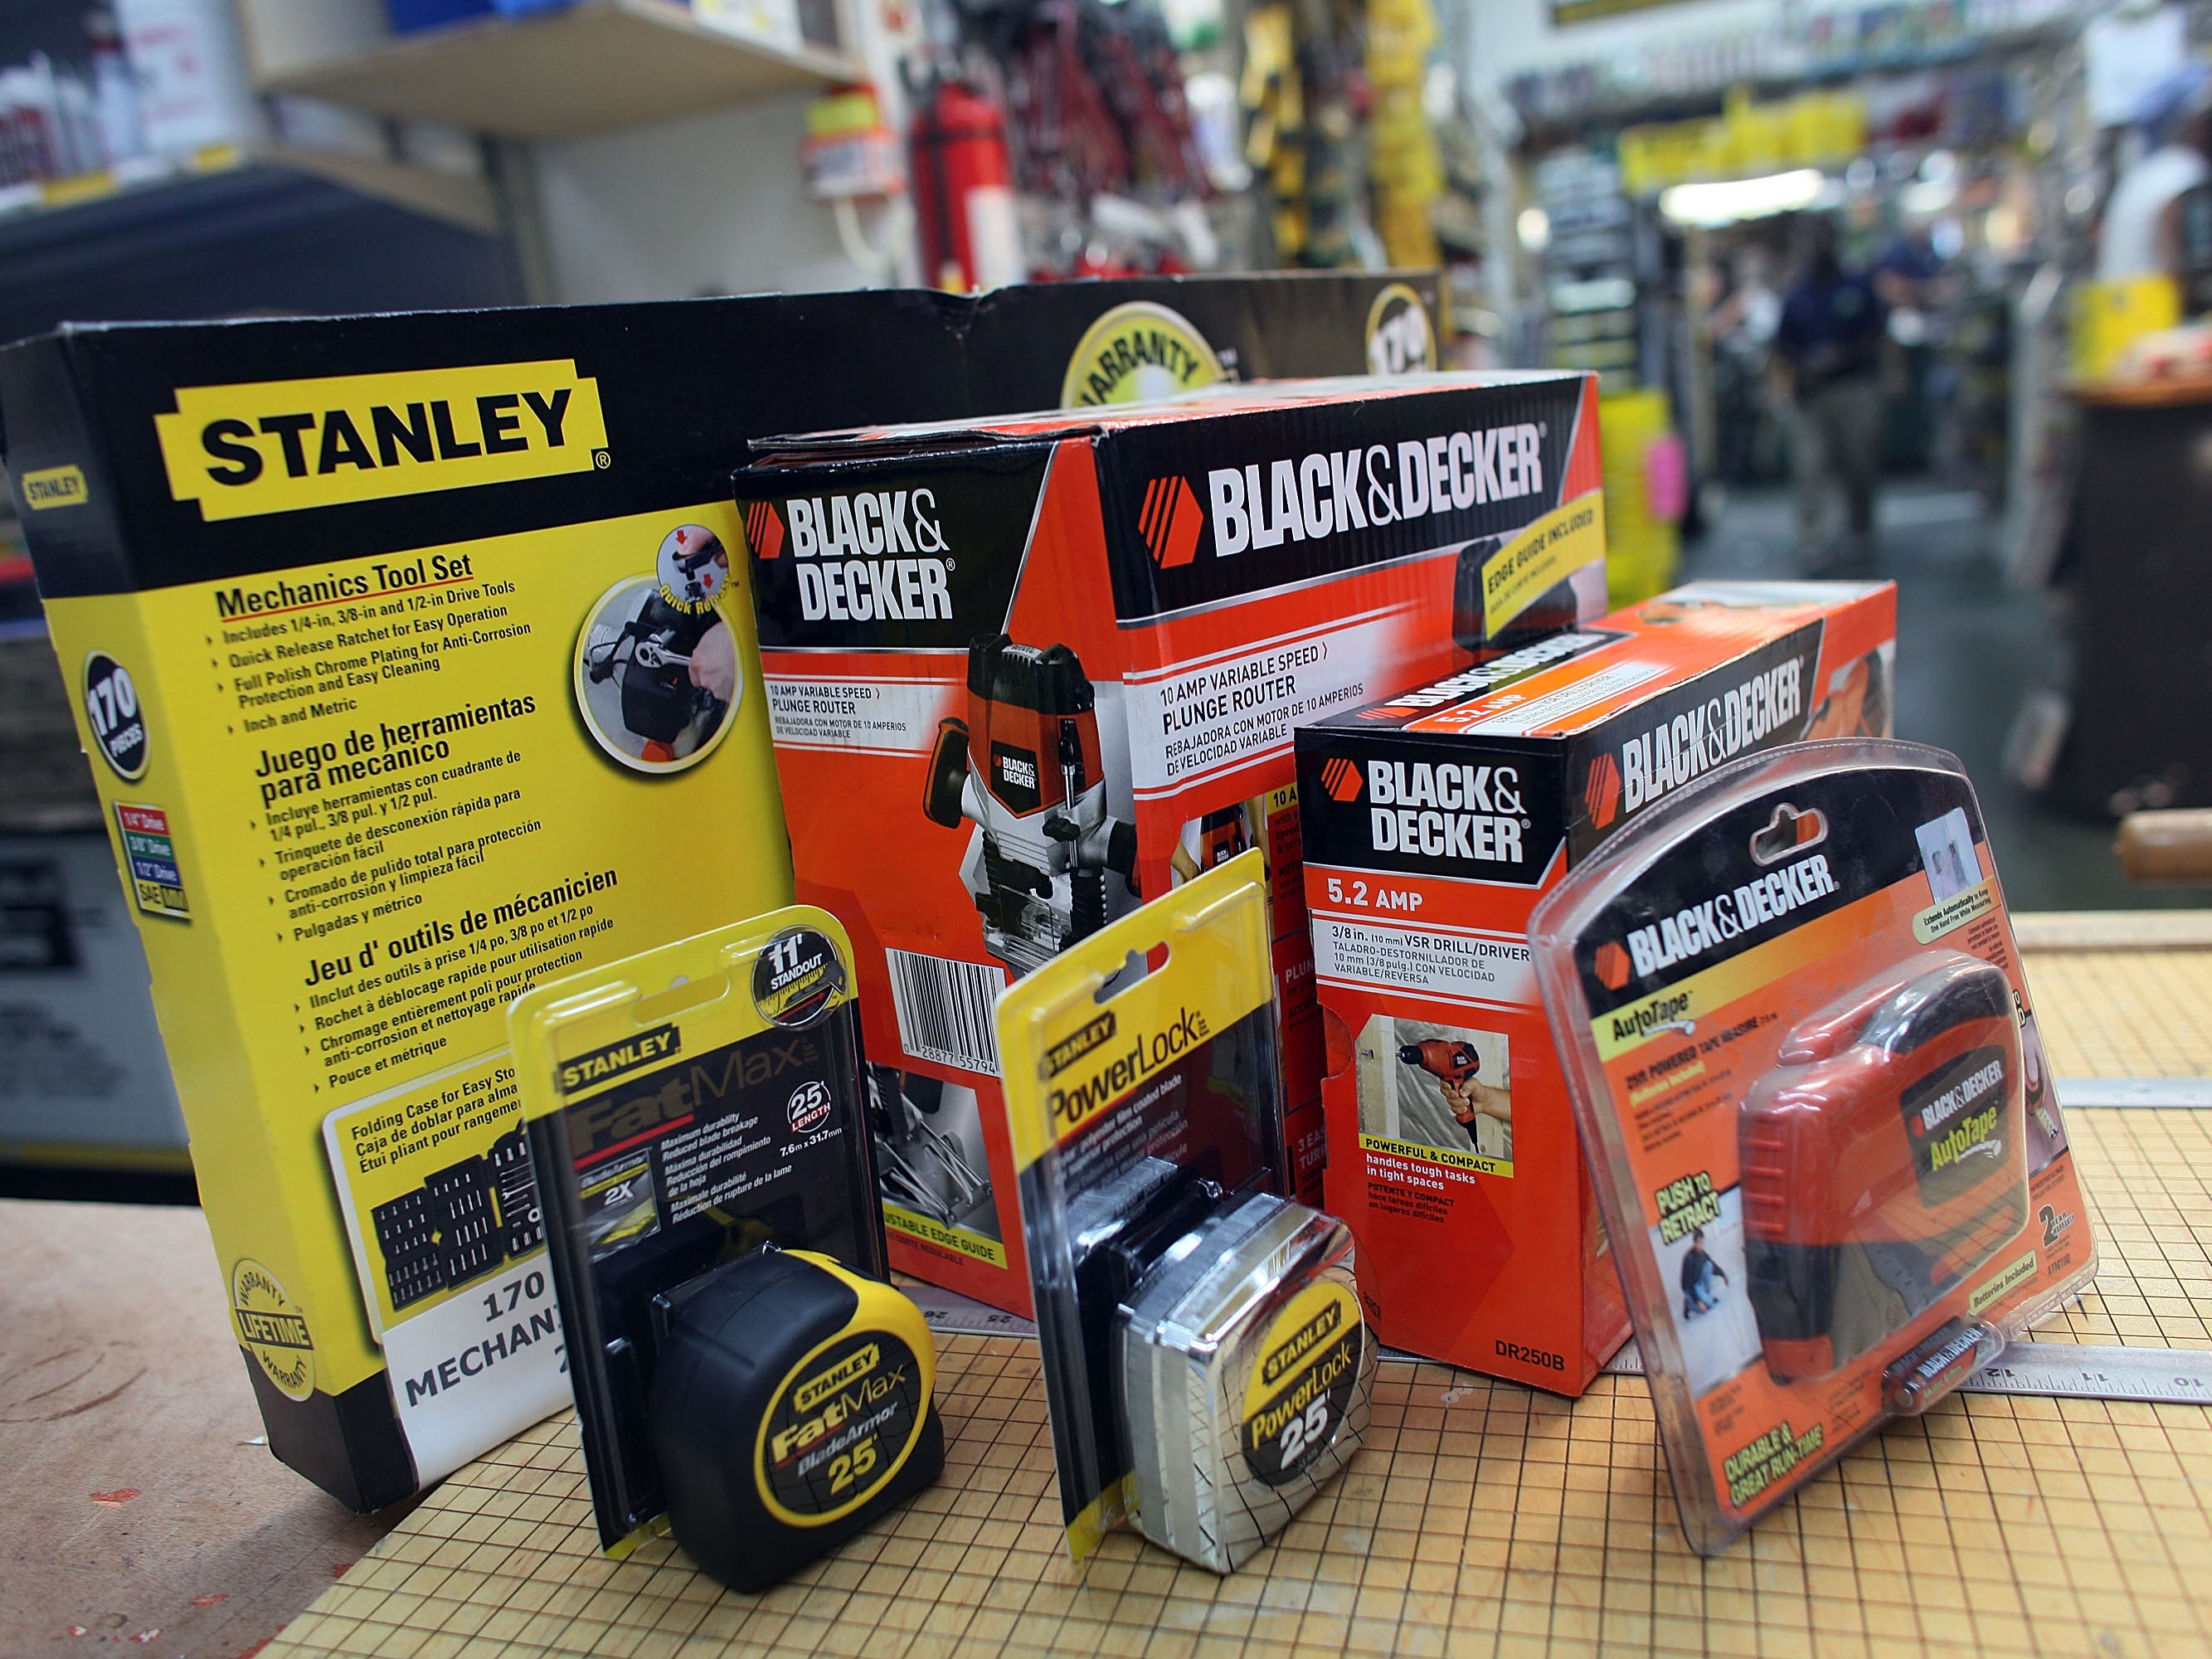 Stanley Black & Decker Sells Its Infrastructure Unit To Narrow Focus